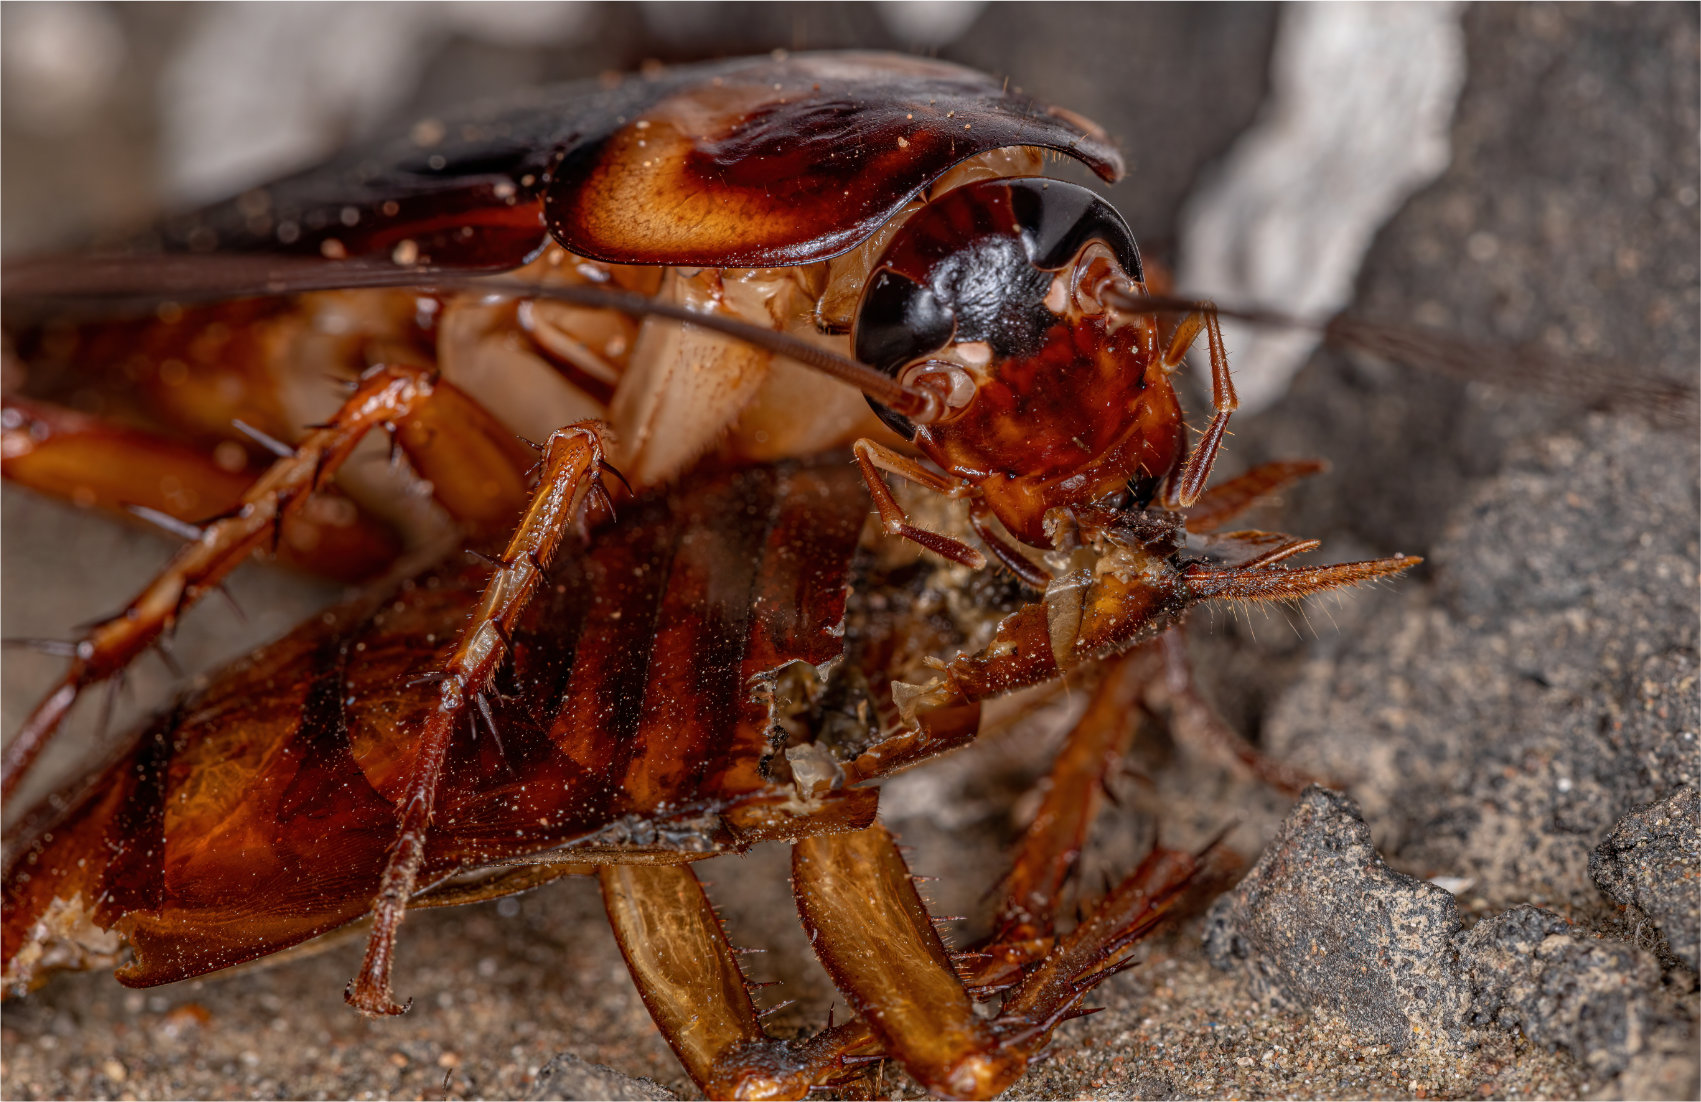 An Image showing a cockroach eating a dead cockroach